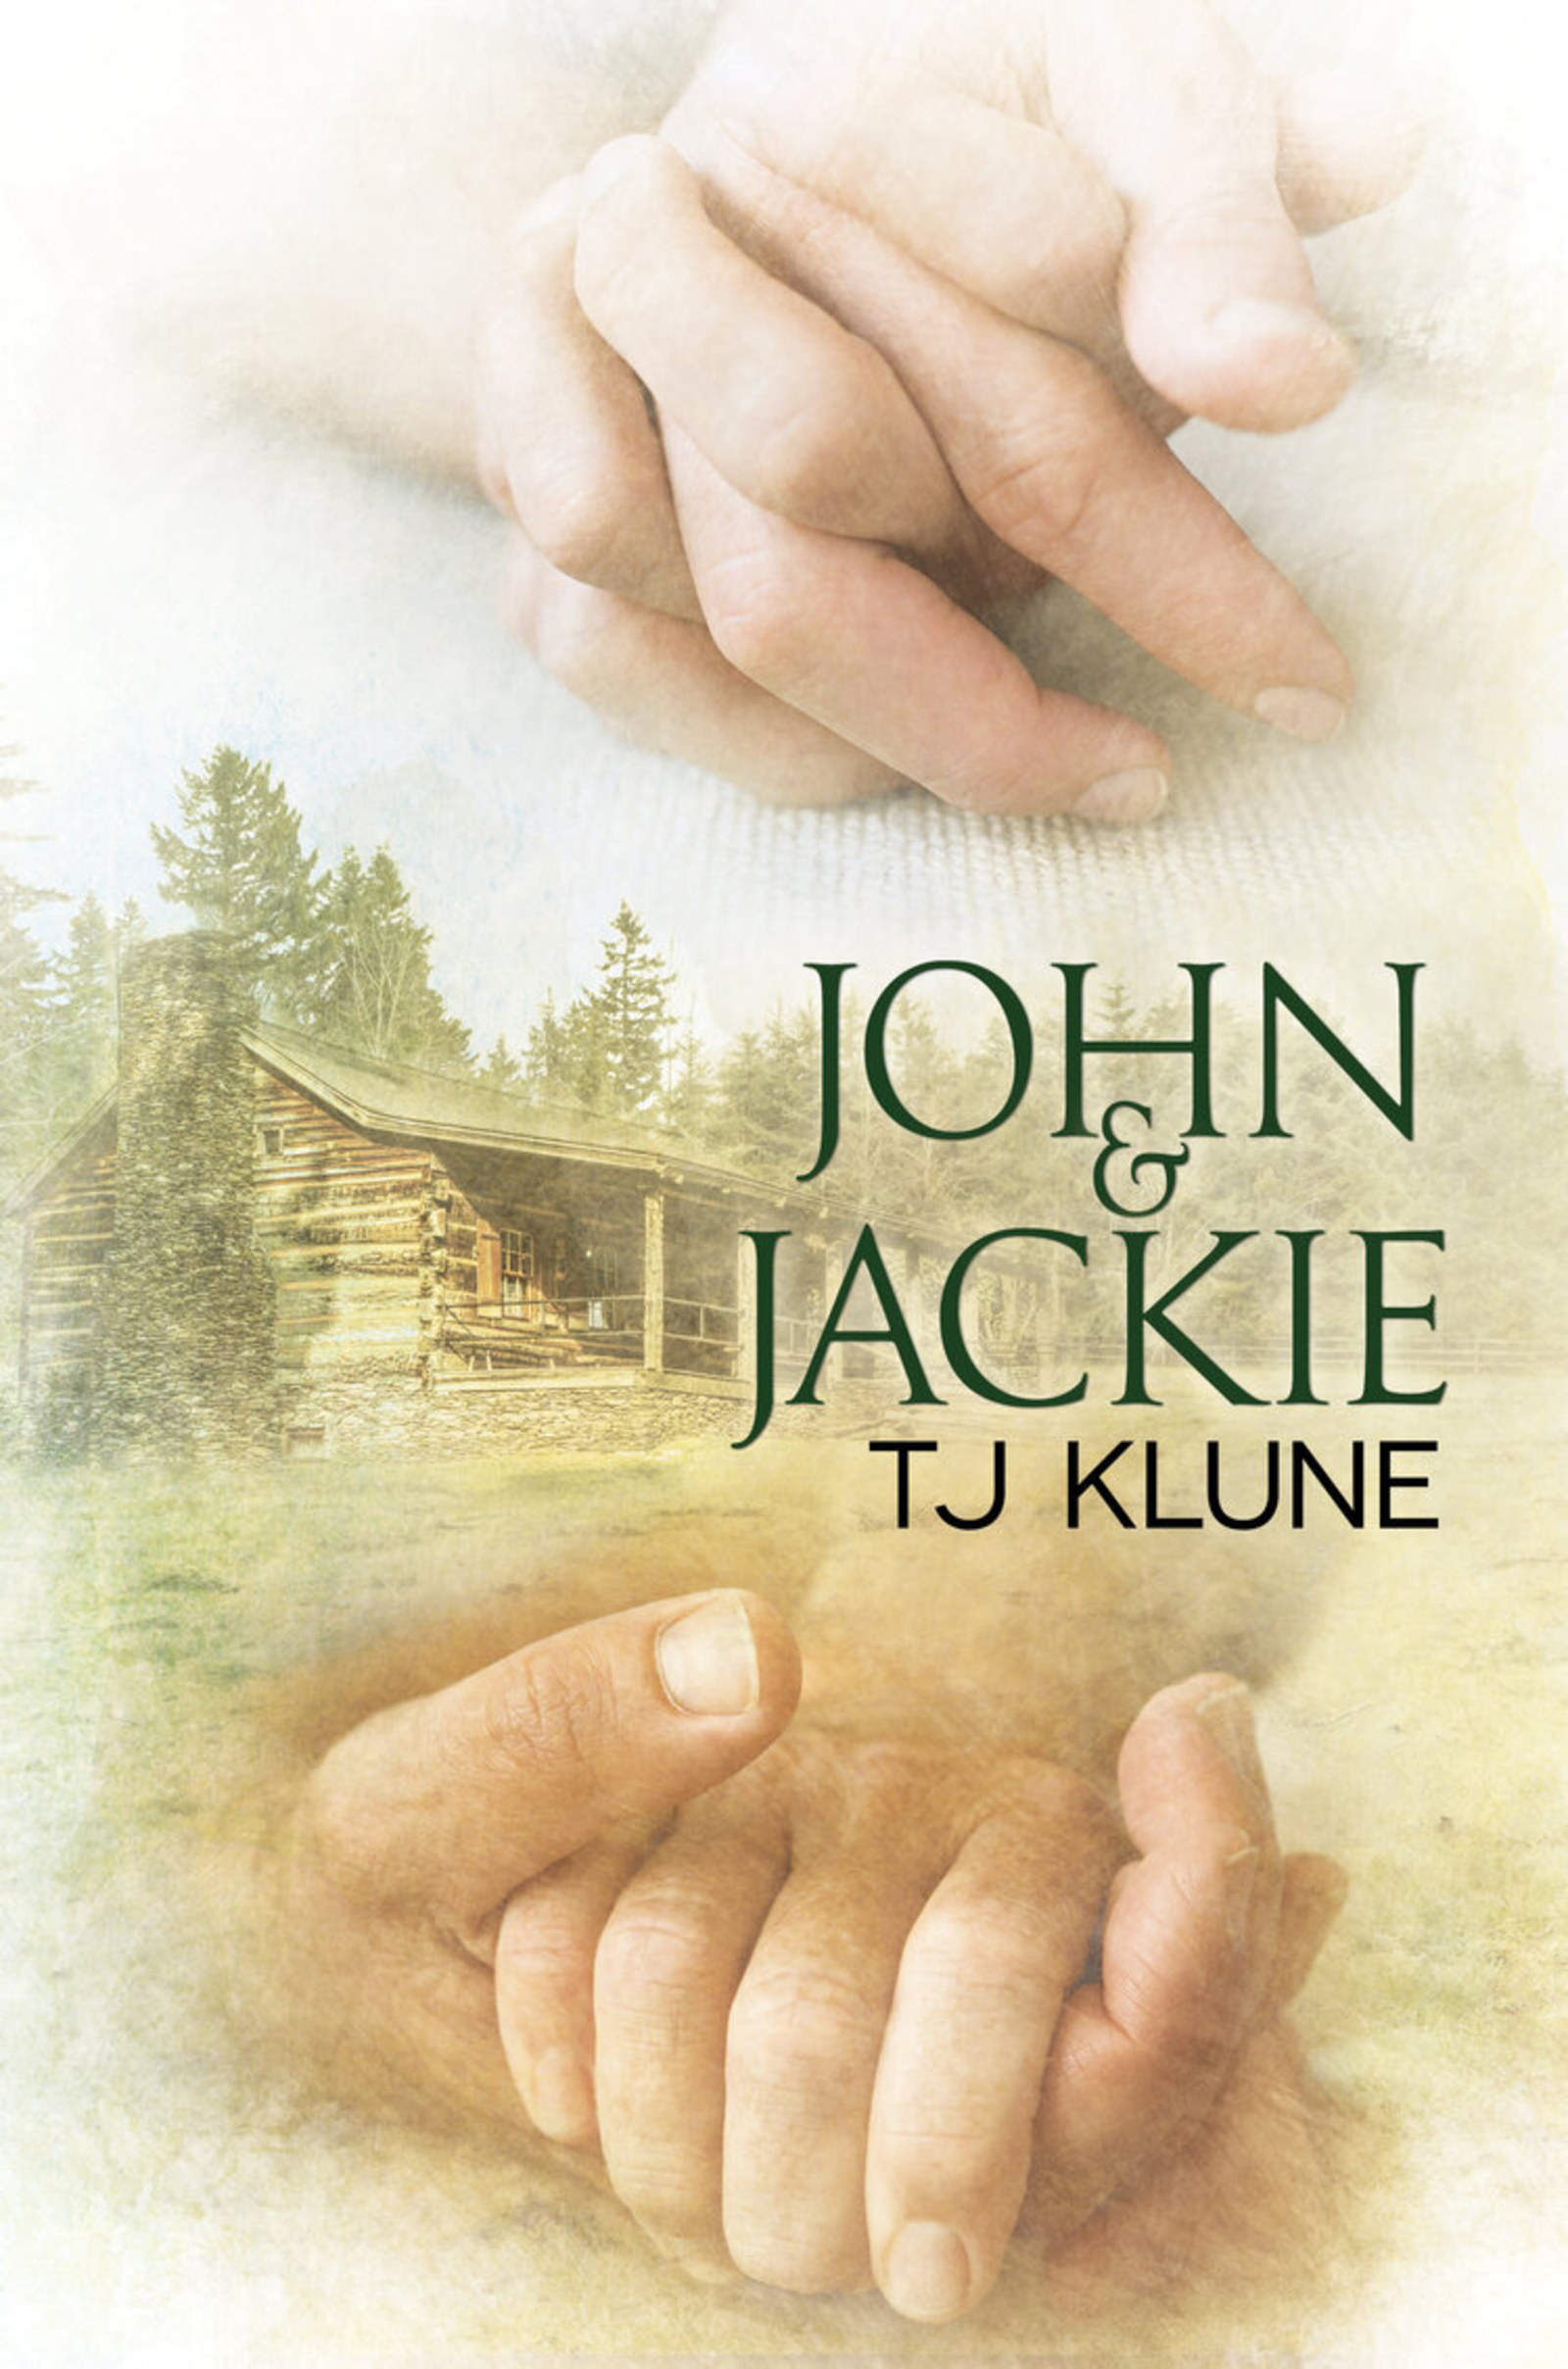 Book Cover of John and Jackie by T.J. Klune